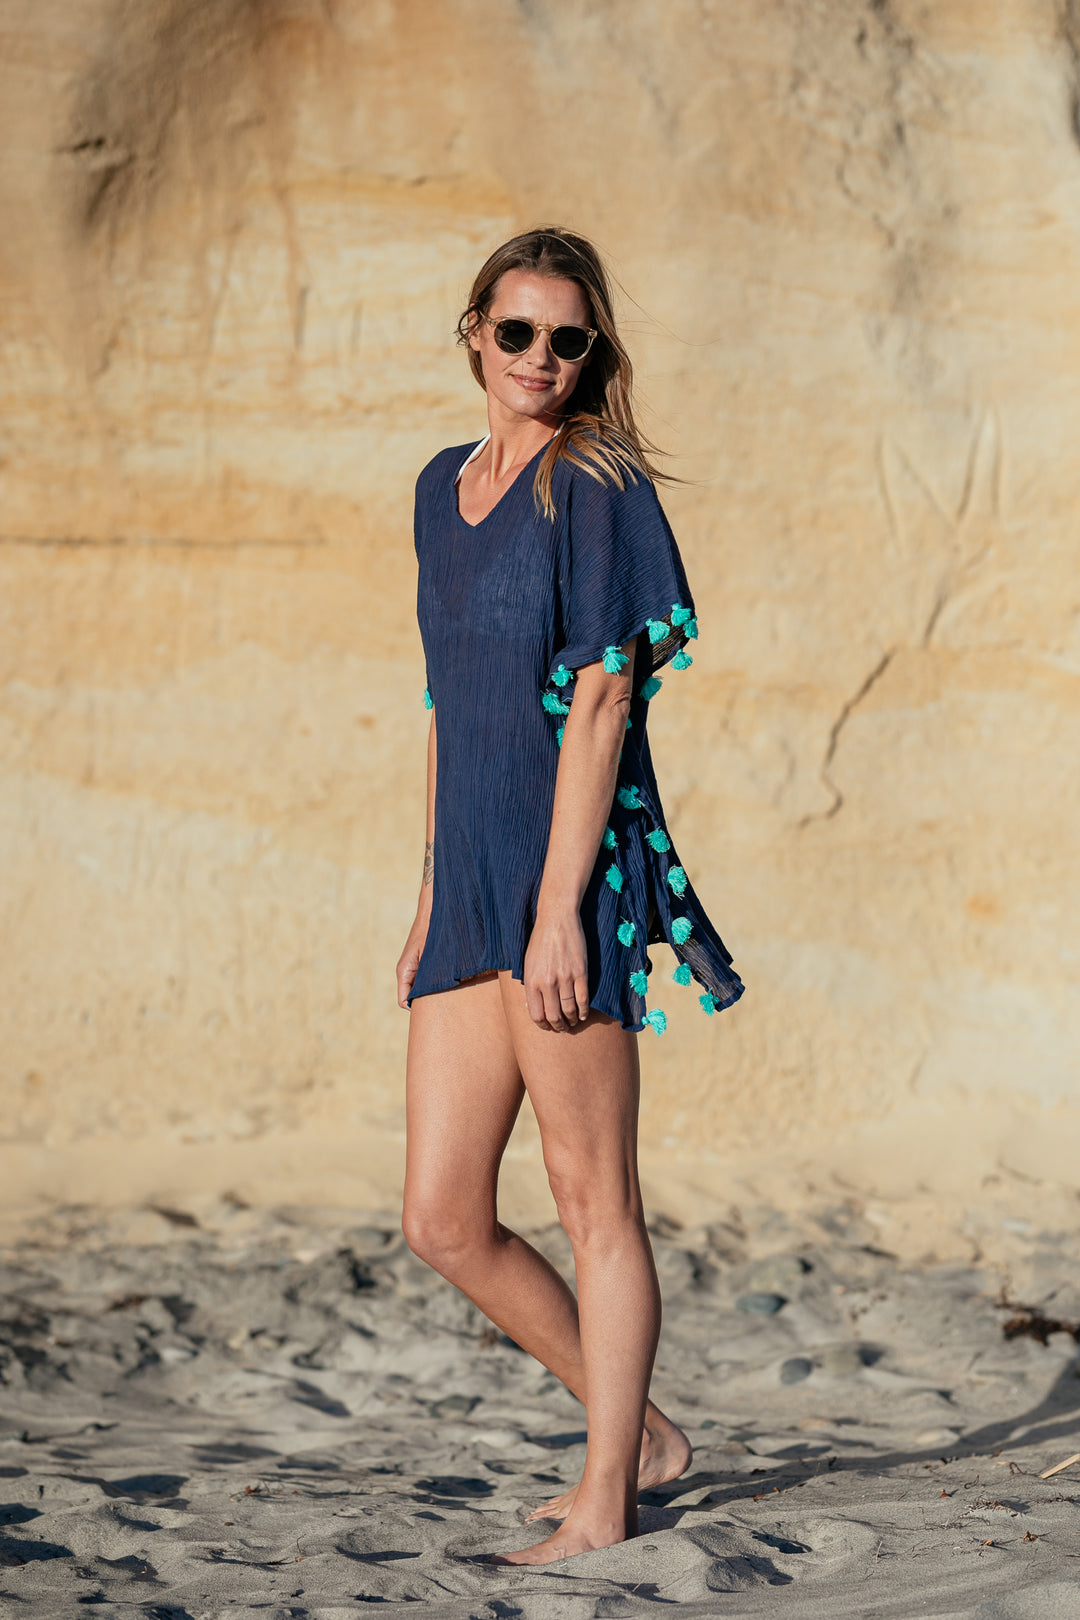 Positano Short Coverup in Navy with Turquoise Tassel - Bette